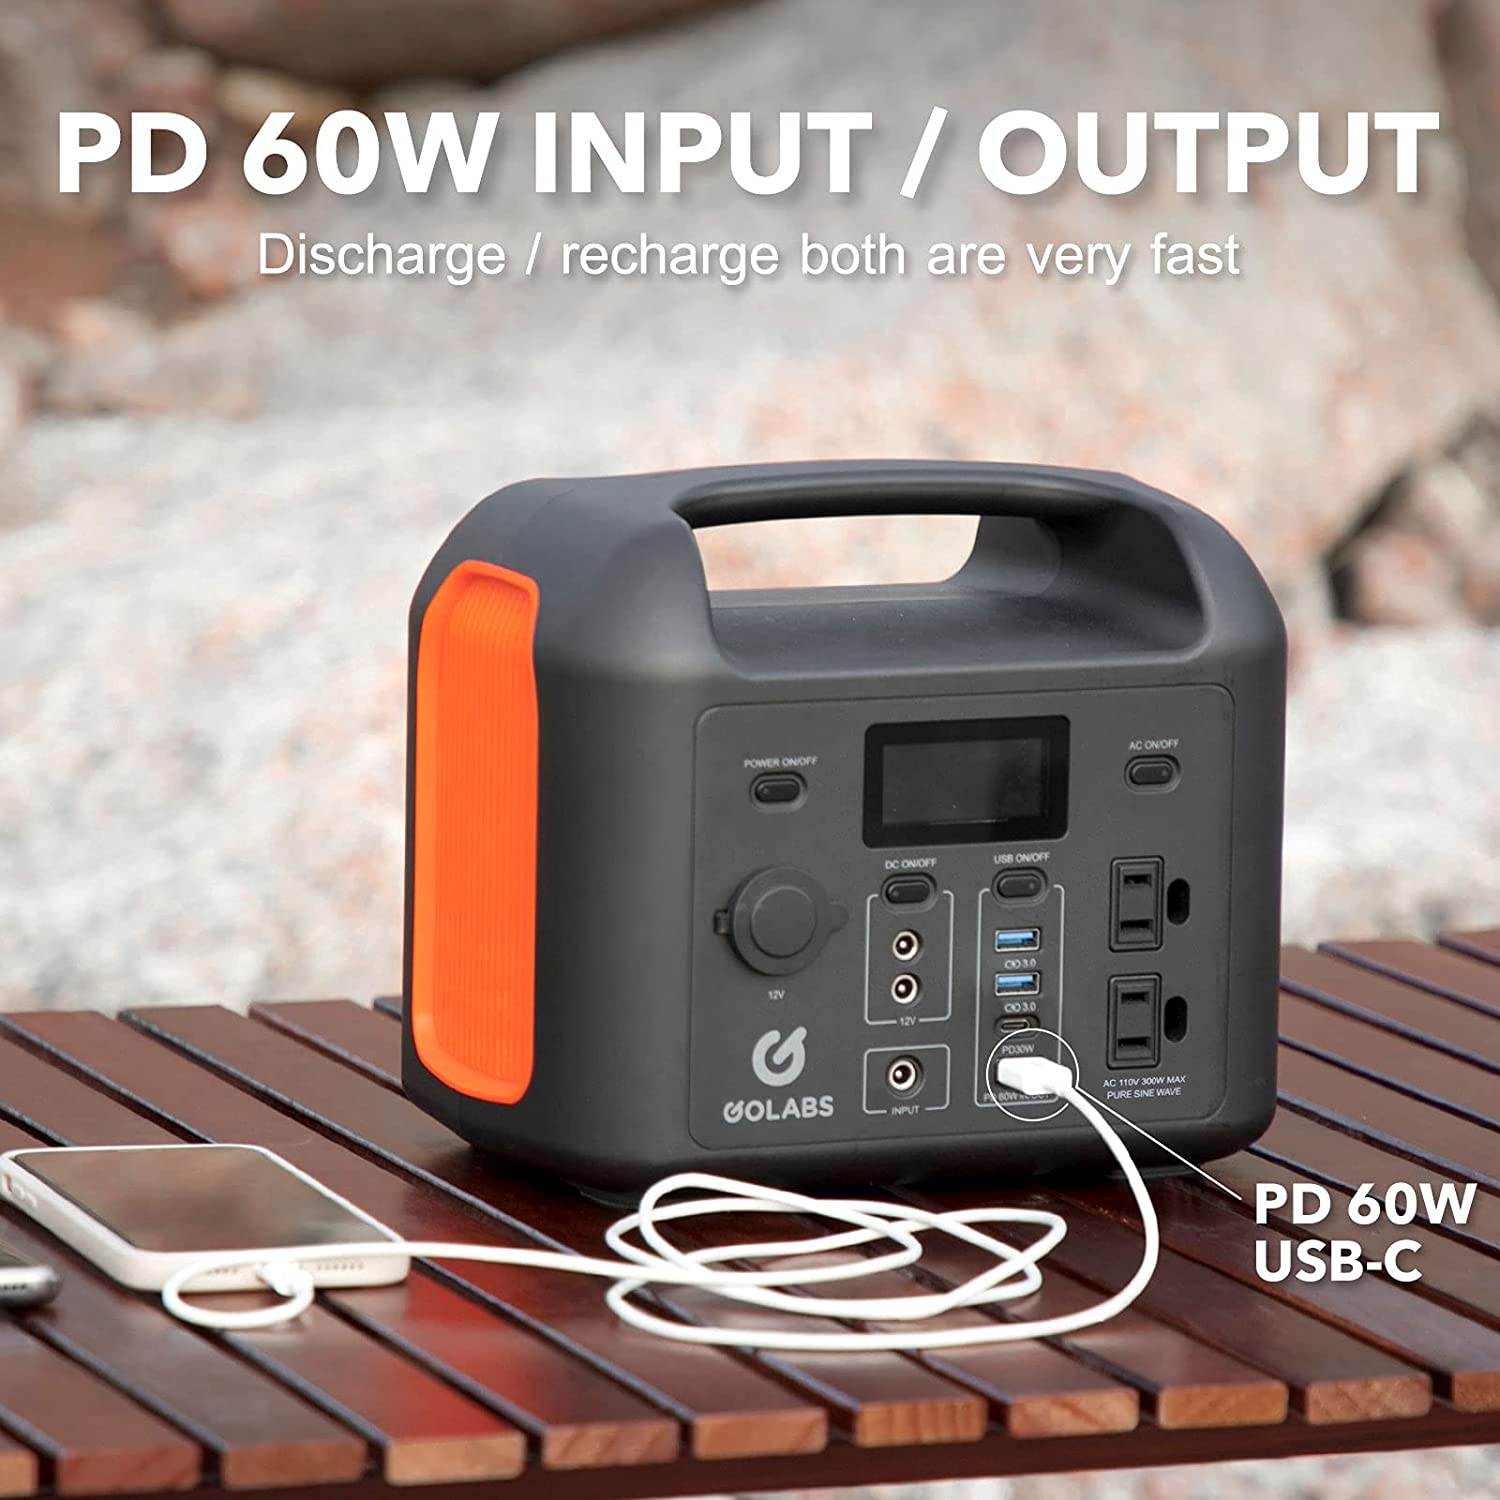 GOLABS Portable Power Station, 299Wh LiFePO4 Battery Backup, PD 60W Type-C Quick Charge, 300W Pure Sine Wave AC Outlet Solar Generator Power Supply for Outdoor Camping Fishing Travel Emergency CPAP (Orange)